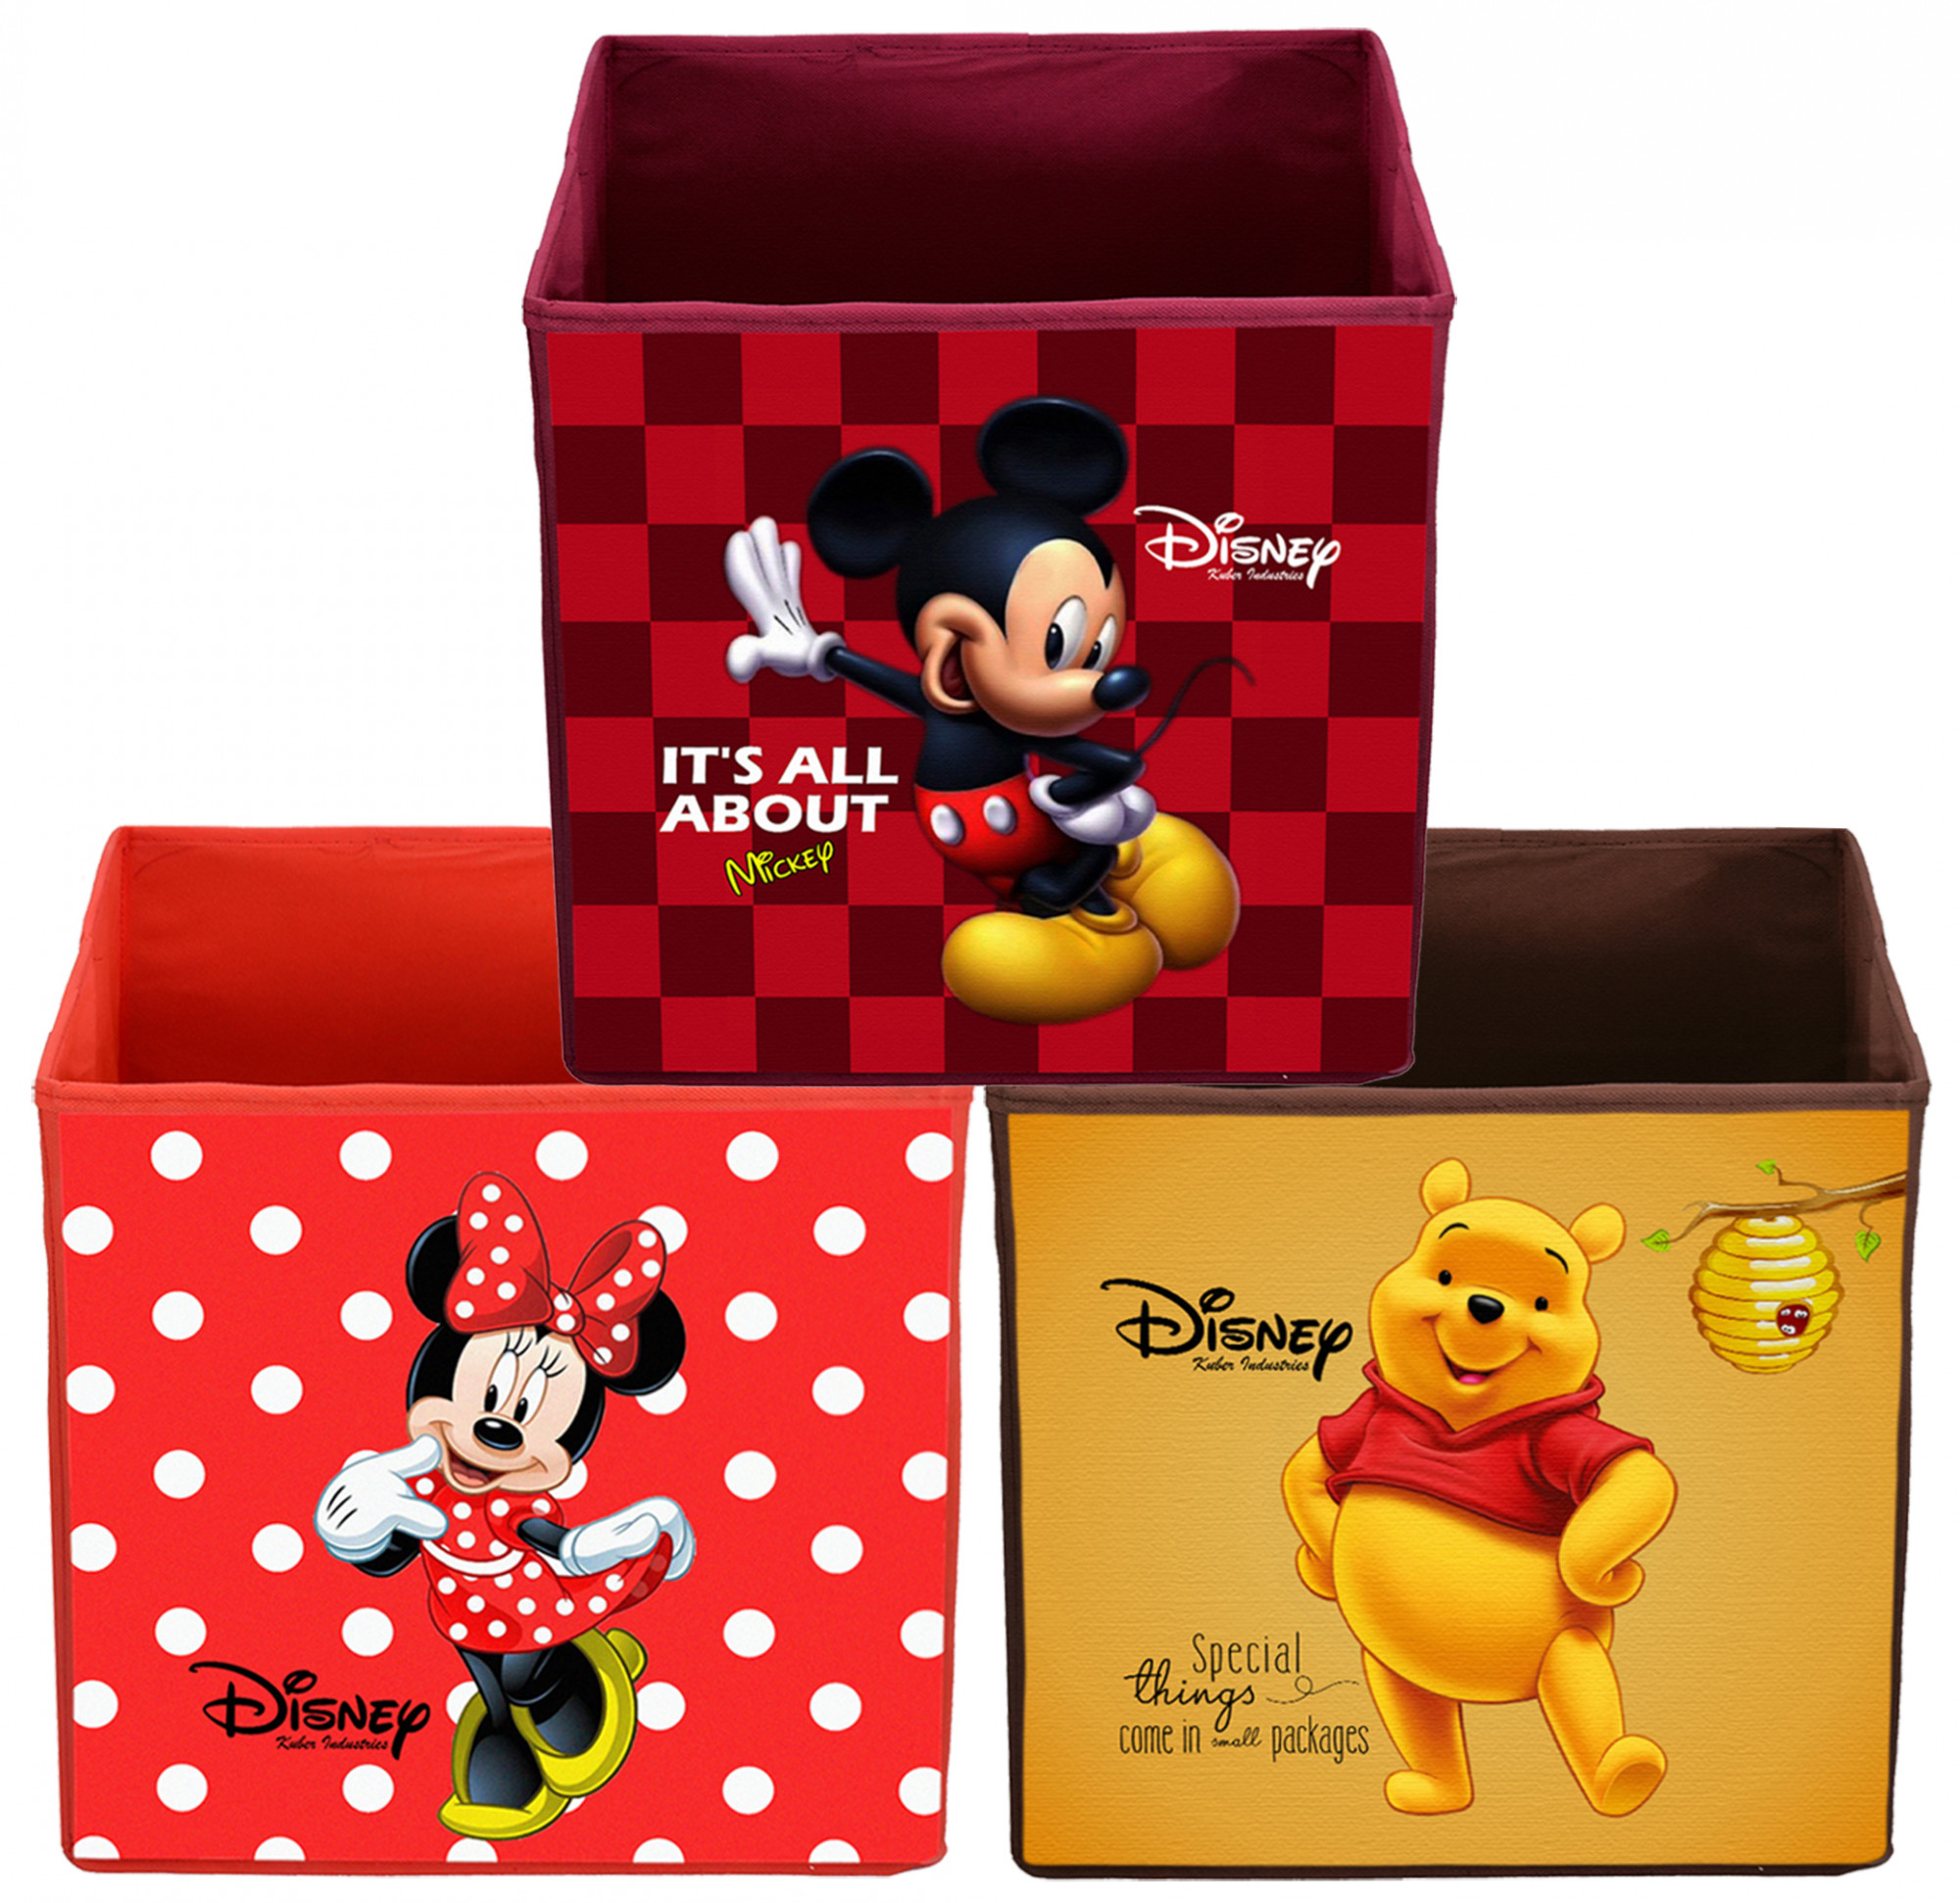 Kuber Industries Disney Print Non Woven Fabric Foldable Large Size Storage Cube Toy,Books,Shoes Storage Box With Handle (Red,Maroon & Brown)